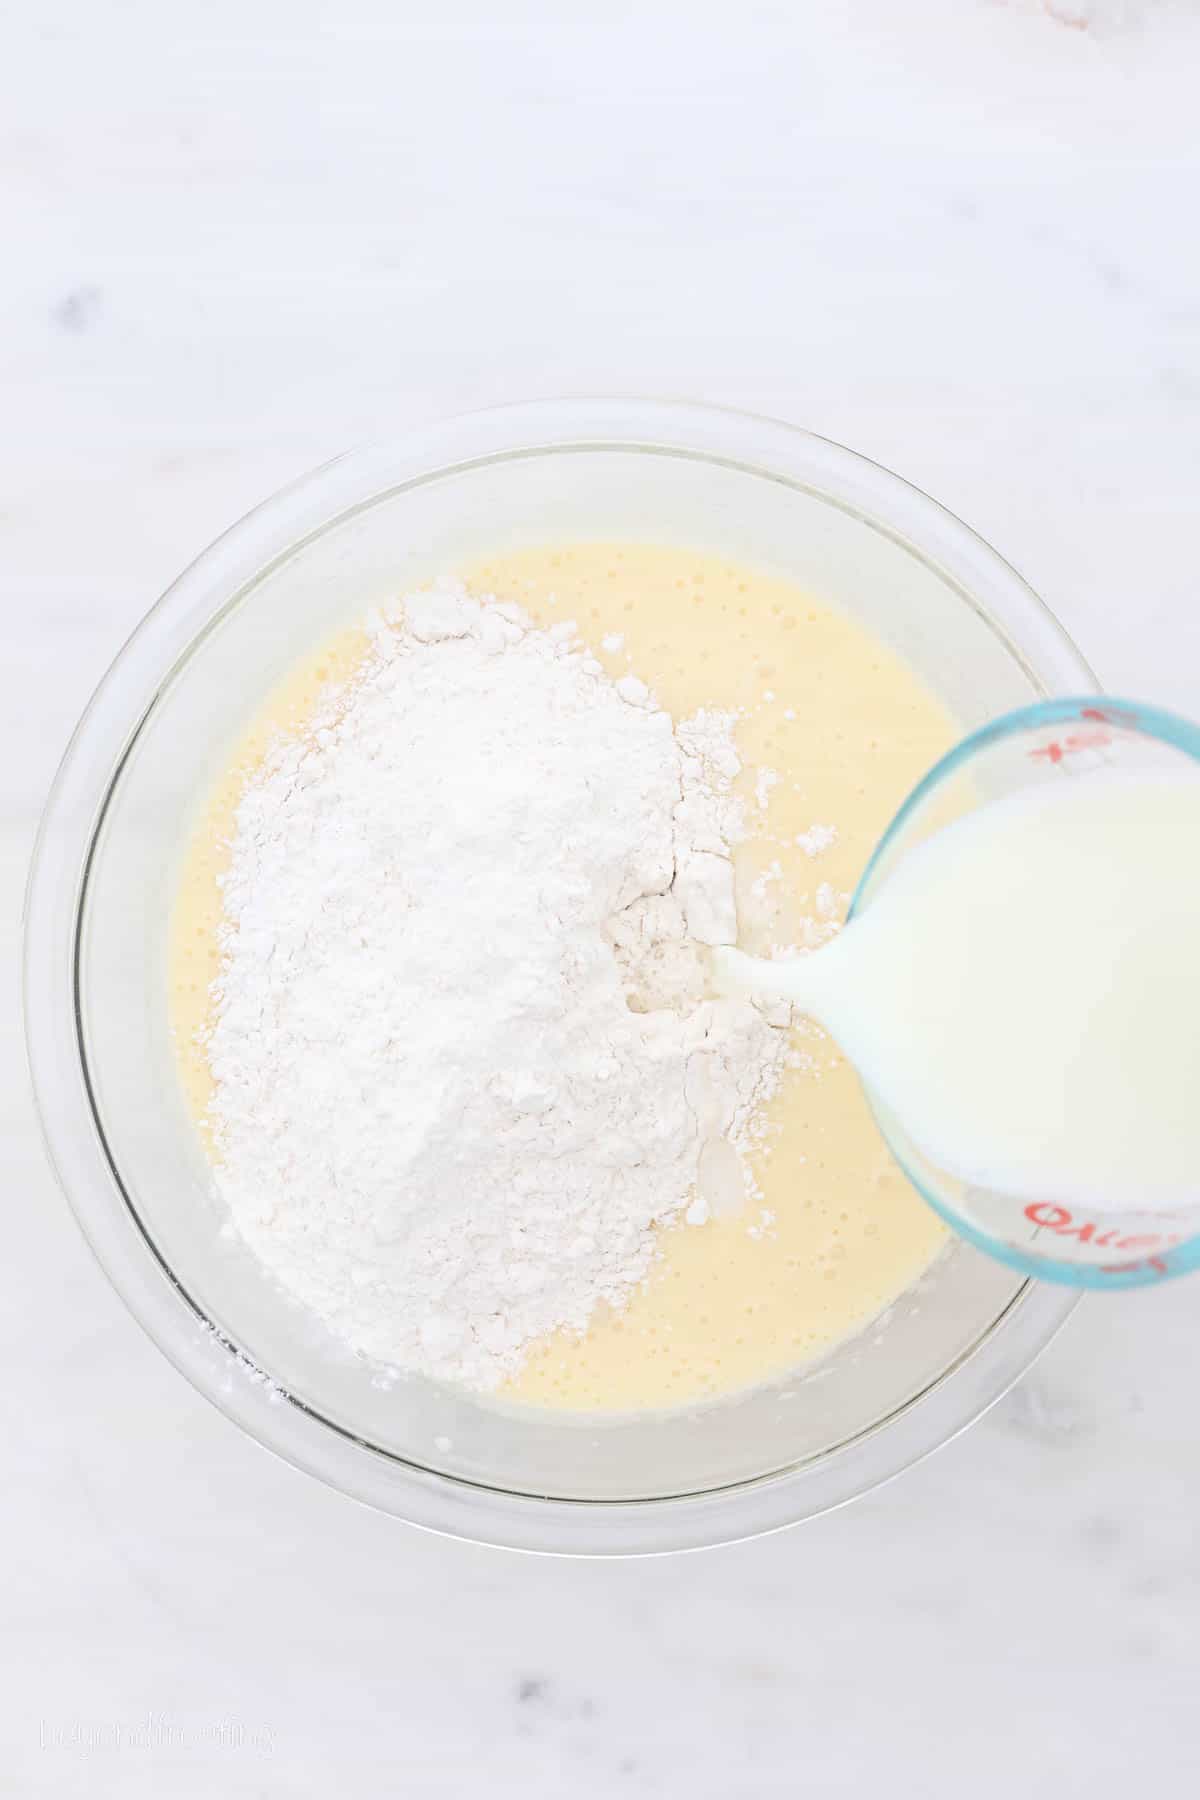 Milk is added to the cake batter ingredients in a glass mixing bowl.